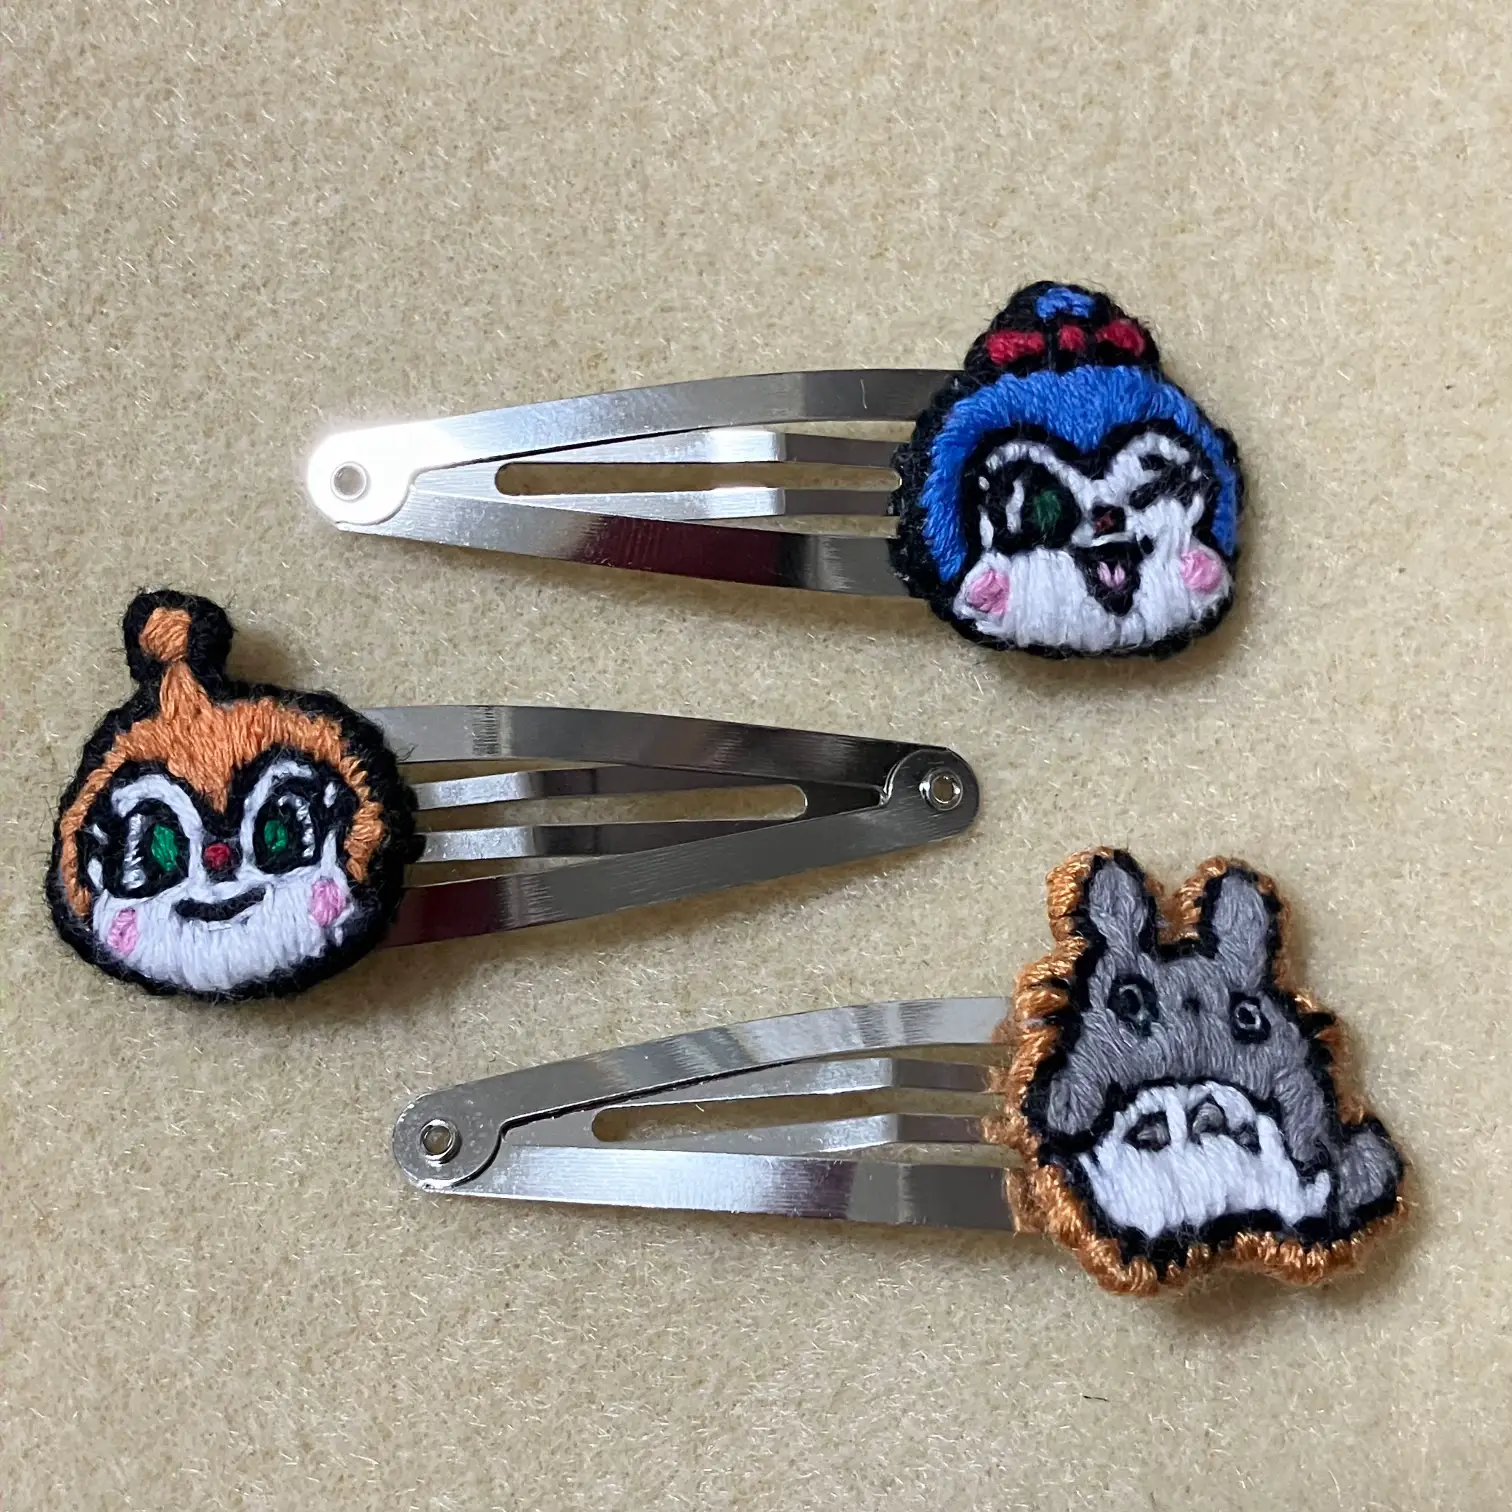 Patching pin Dokin-chan added | Gallery posted by くまぁこ | Lemon8